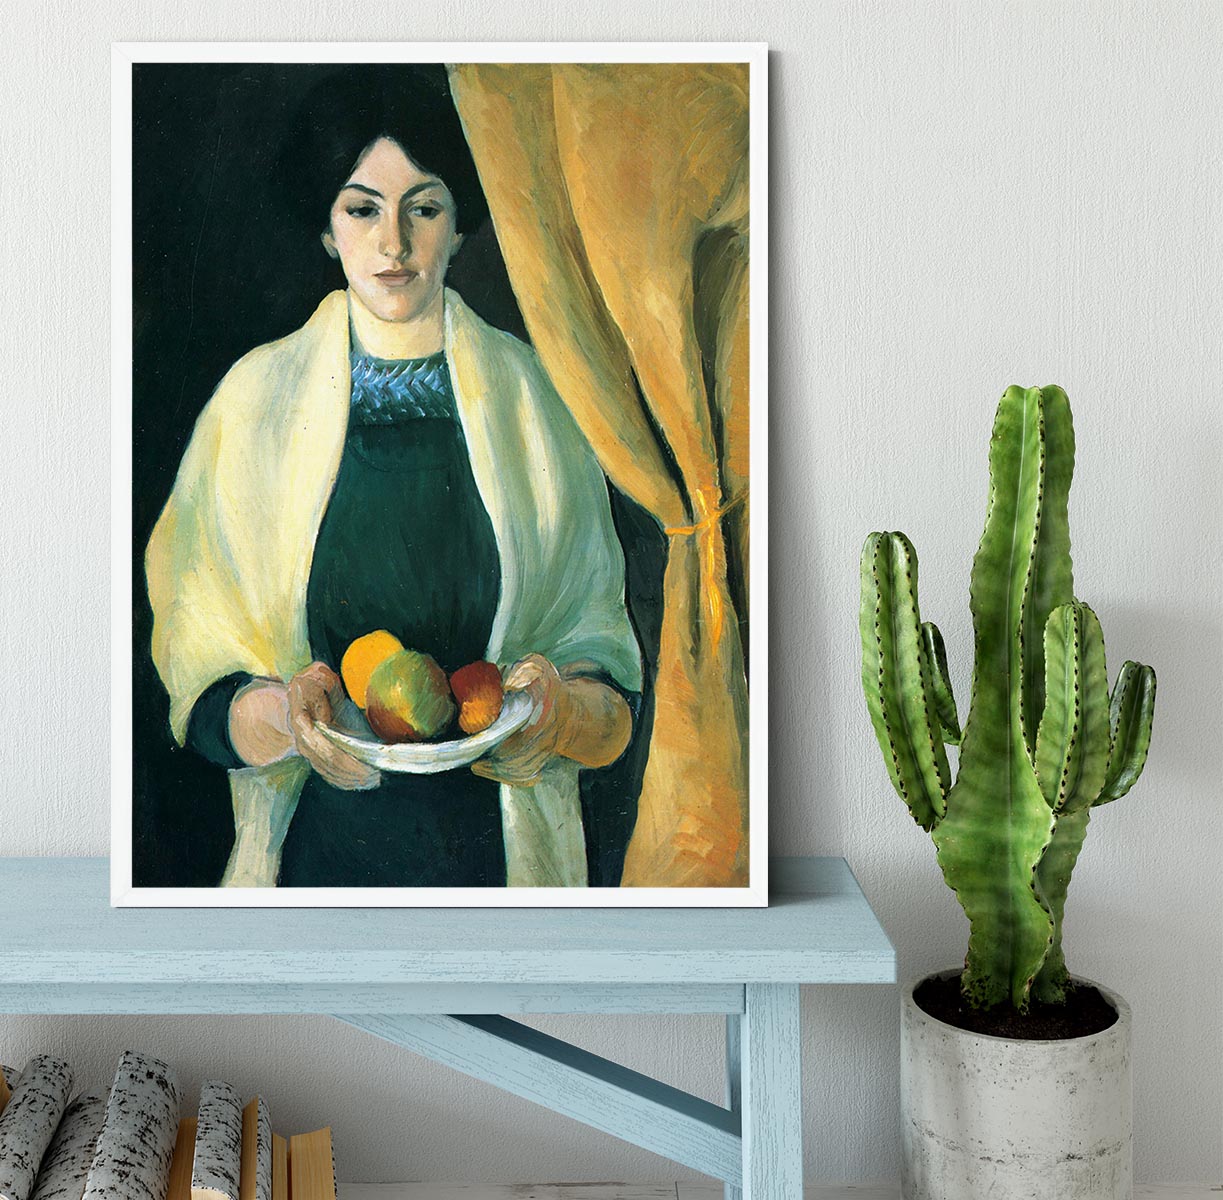 Portrait with apples portrait of the wife of the artist by Macke Framed Print - Canvas Art Rocks -6